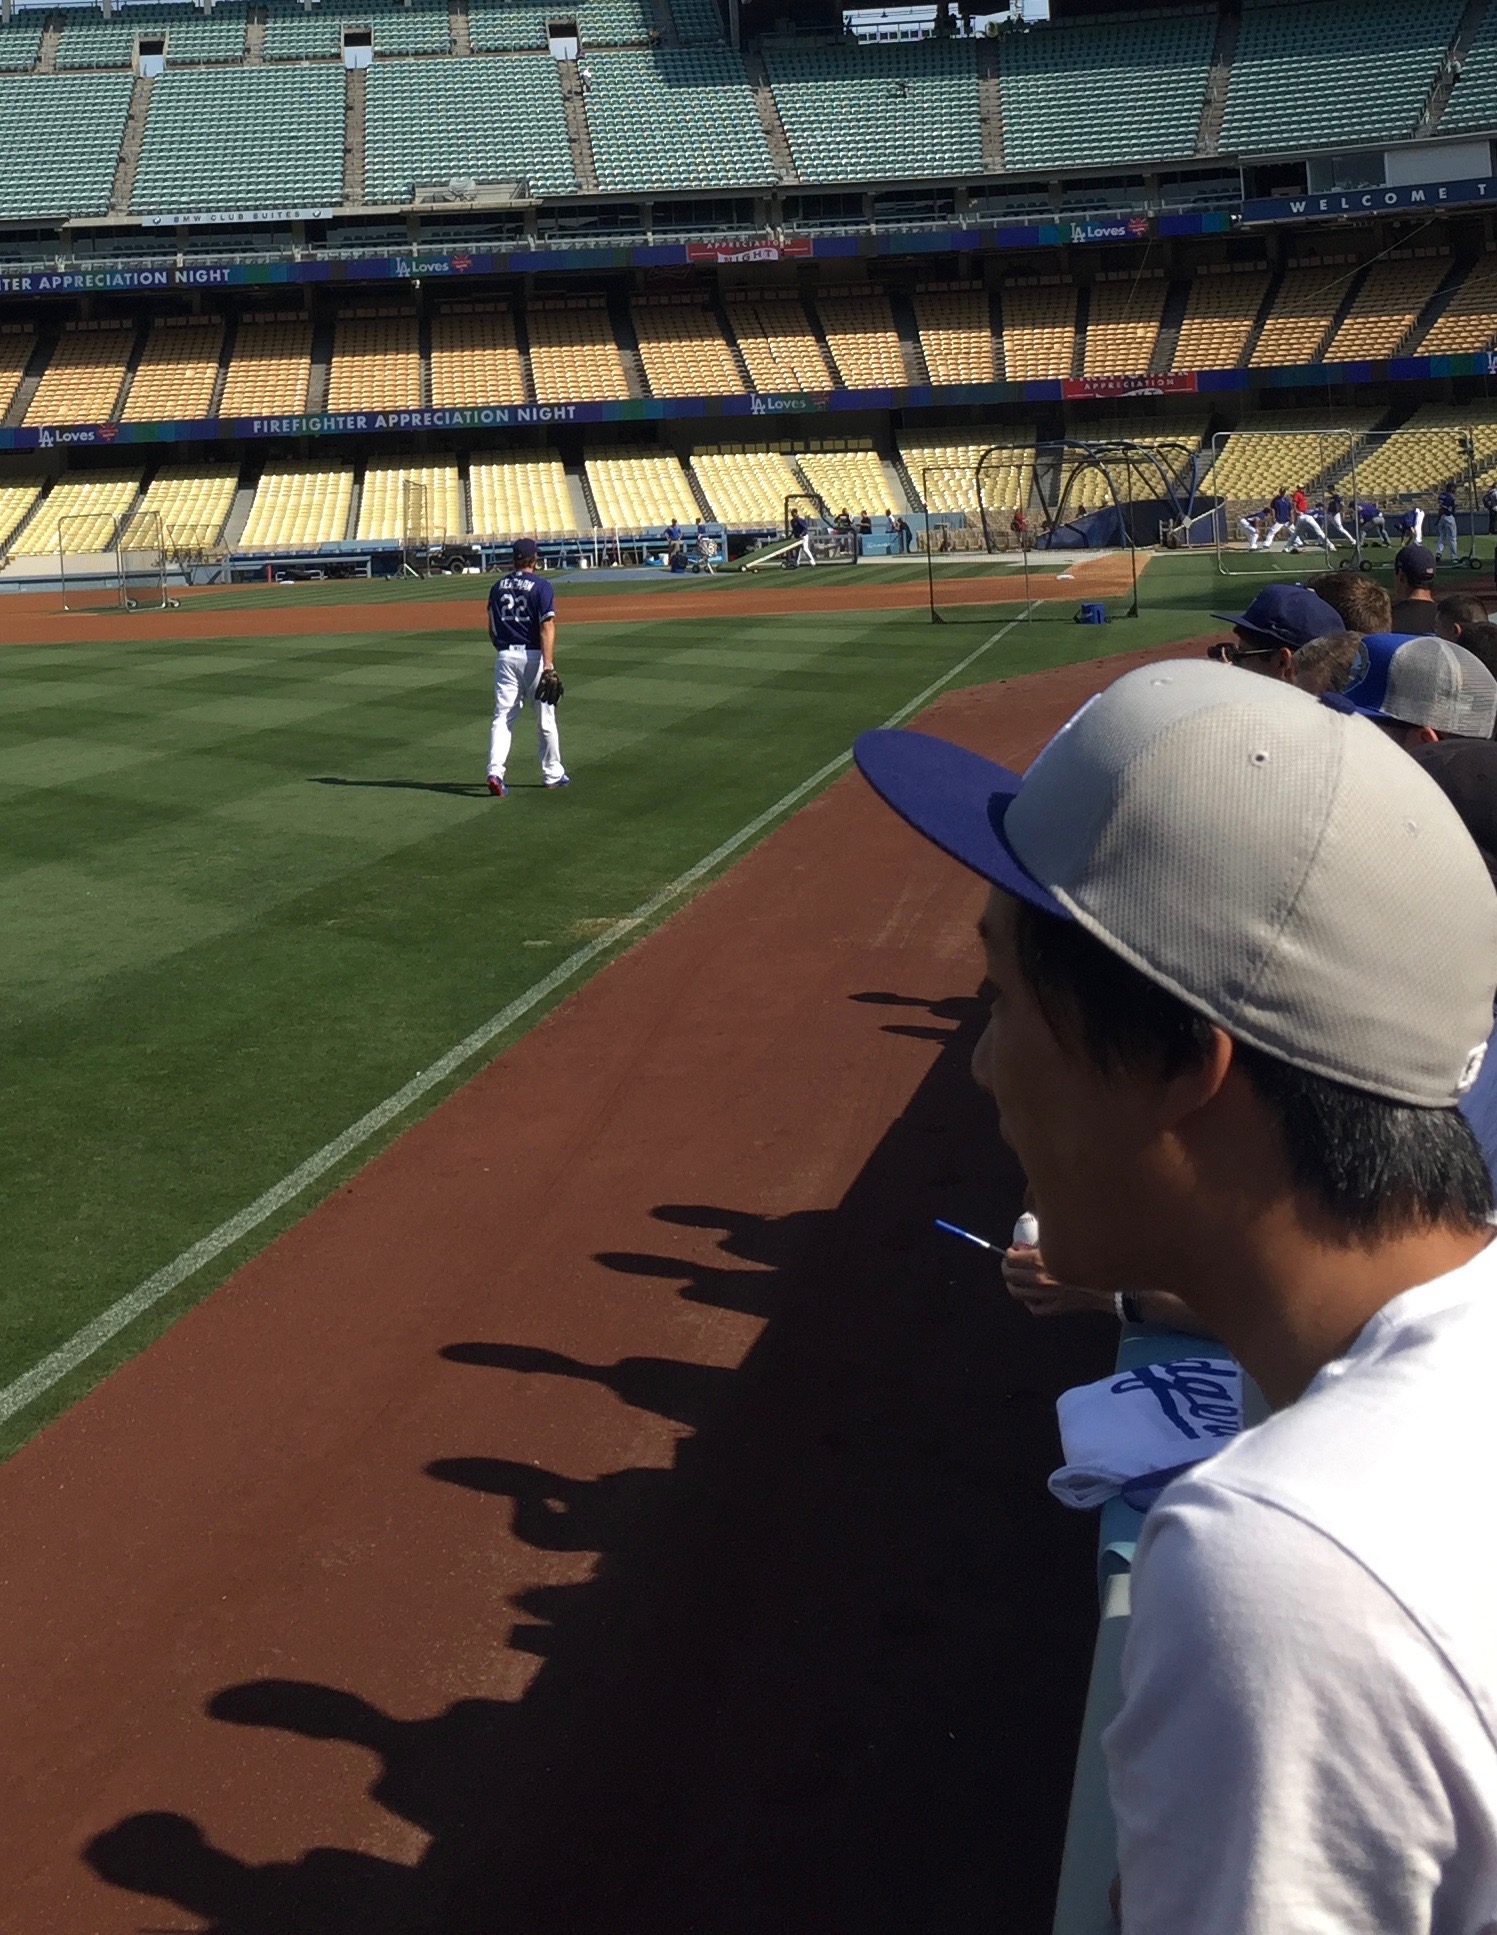 Clayton Kershaw exits the field